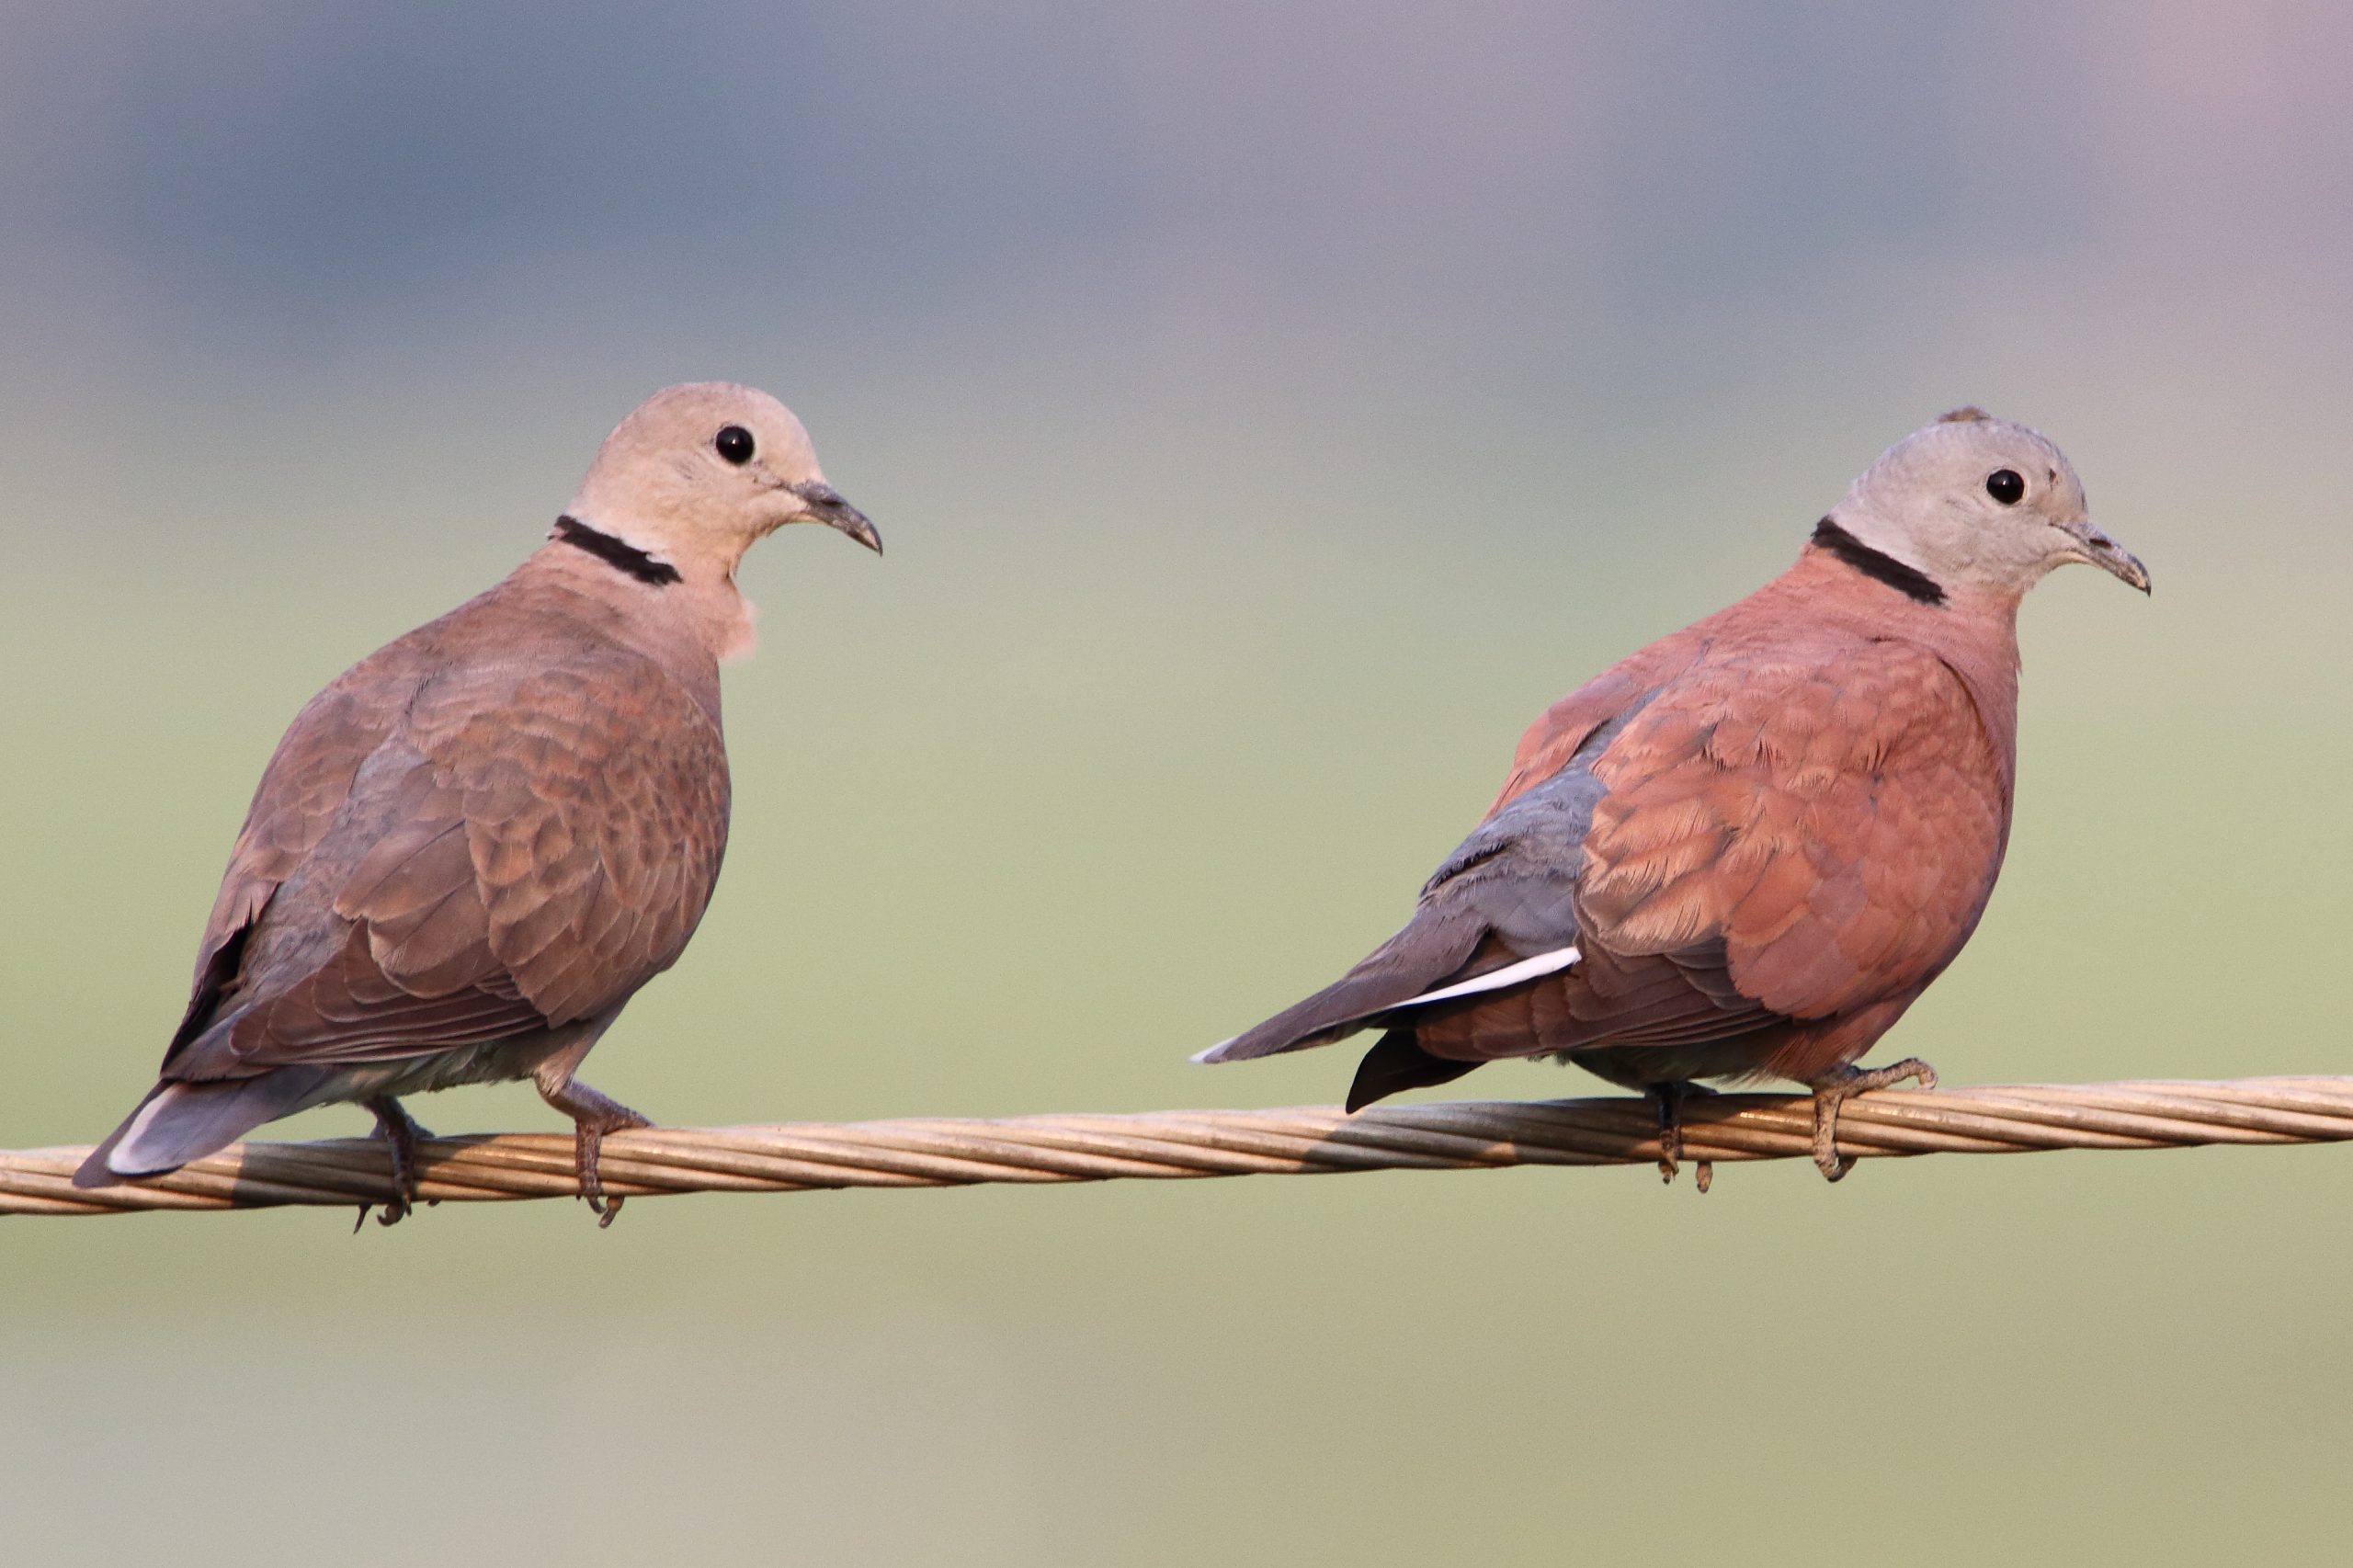 A pair of doves